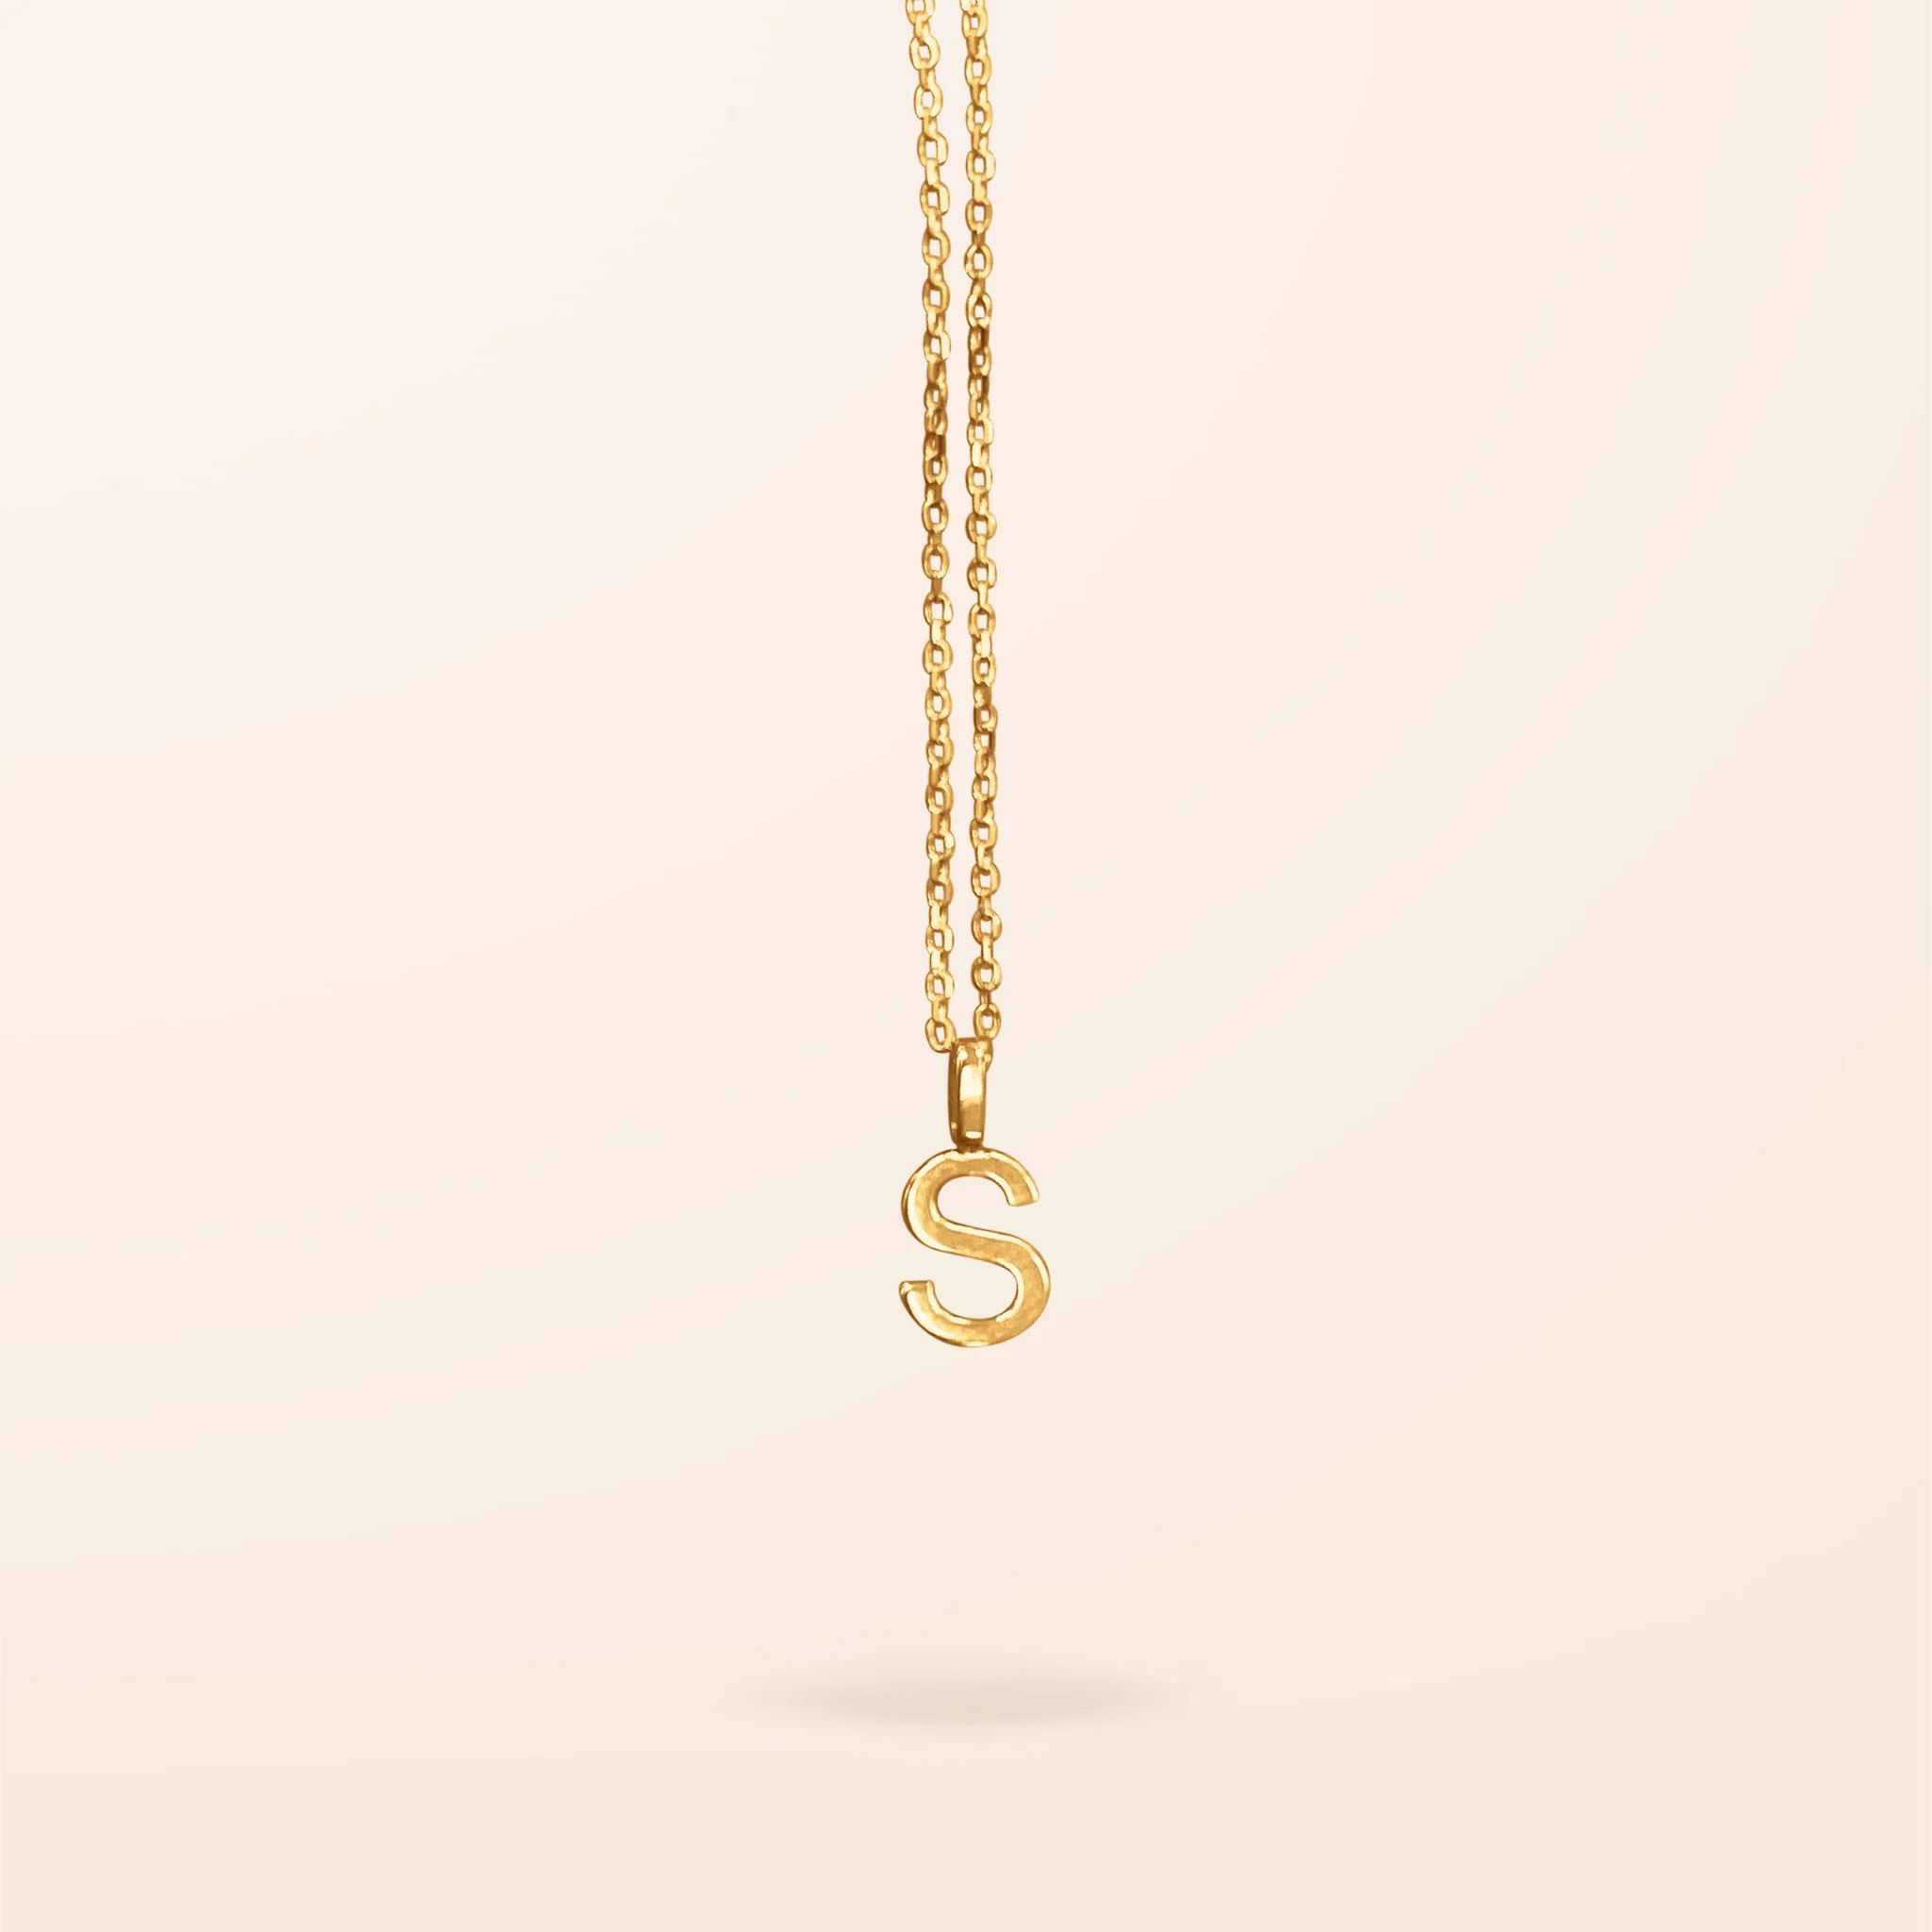 10K Gold Initial Necklace | Van Der Hout Jewelry